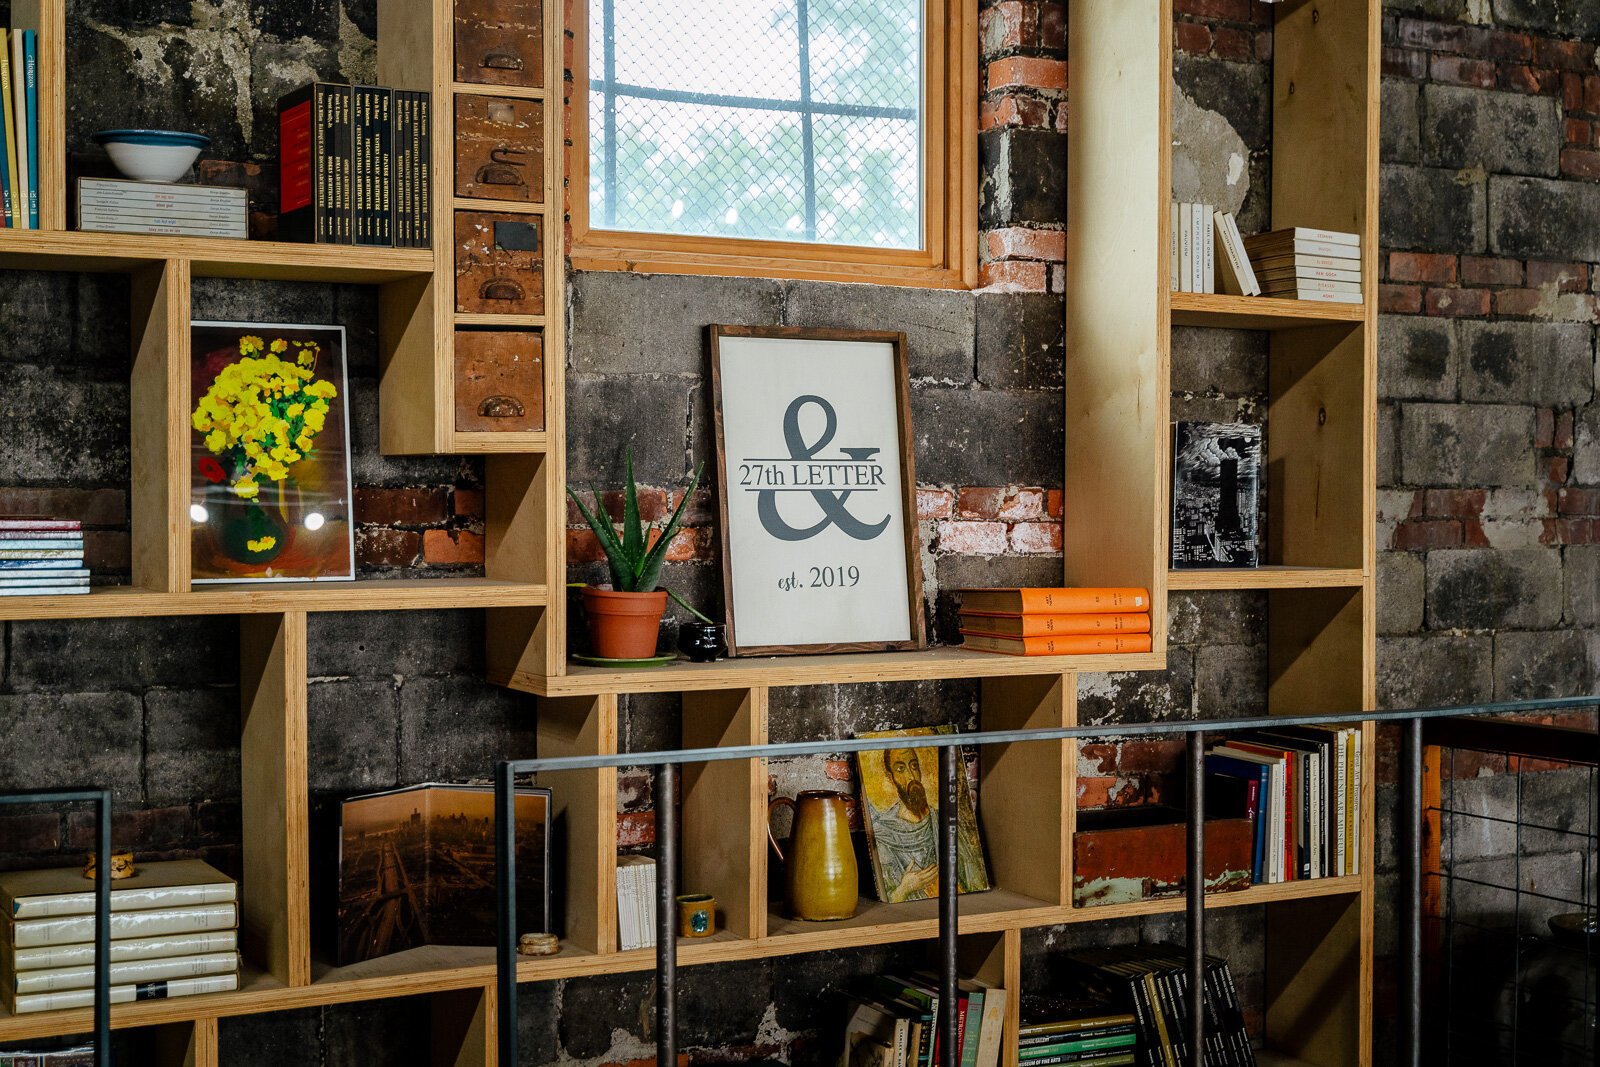 "The ampersand symbol represents everything we want to do, which is bring people together," says co-owner Drew Pineda. "We want to be a bookstore AND...a place to convene, write, explore ideas and art."